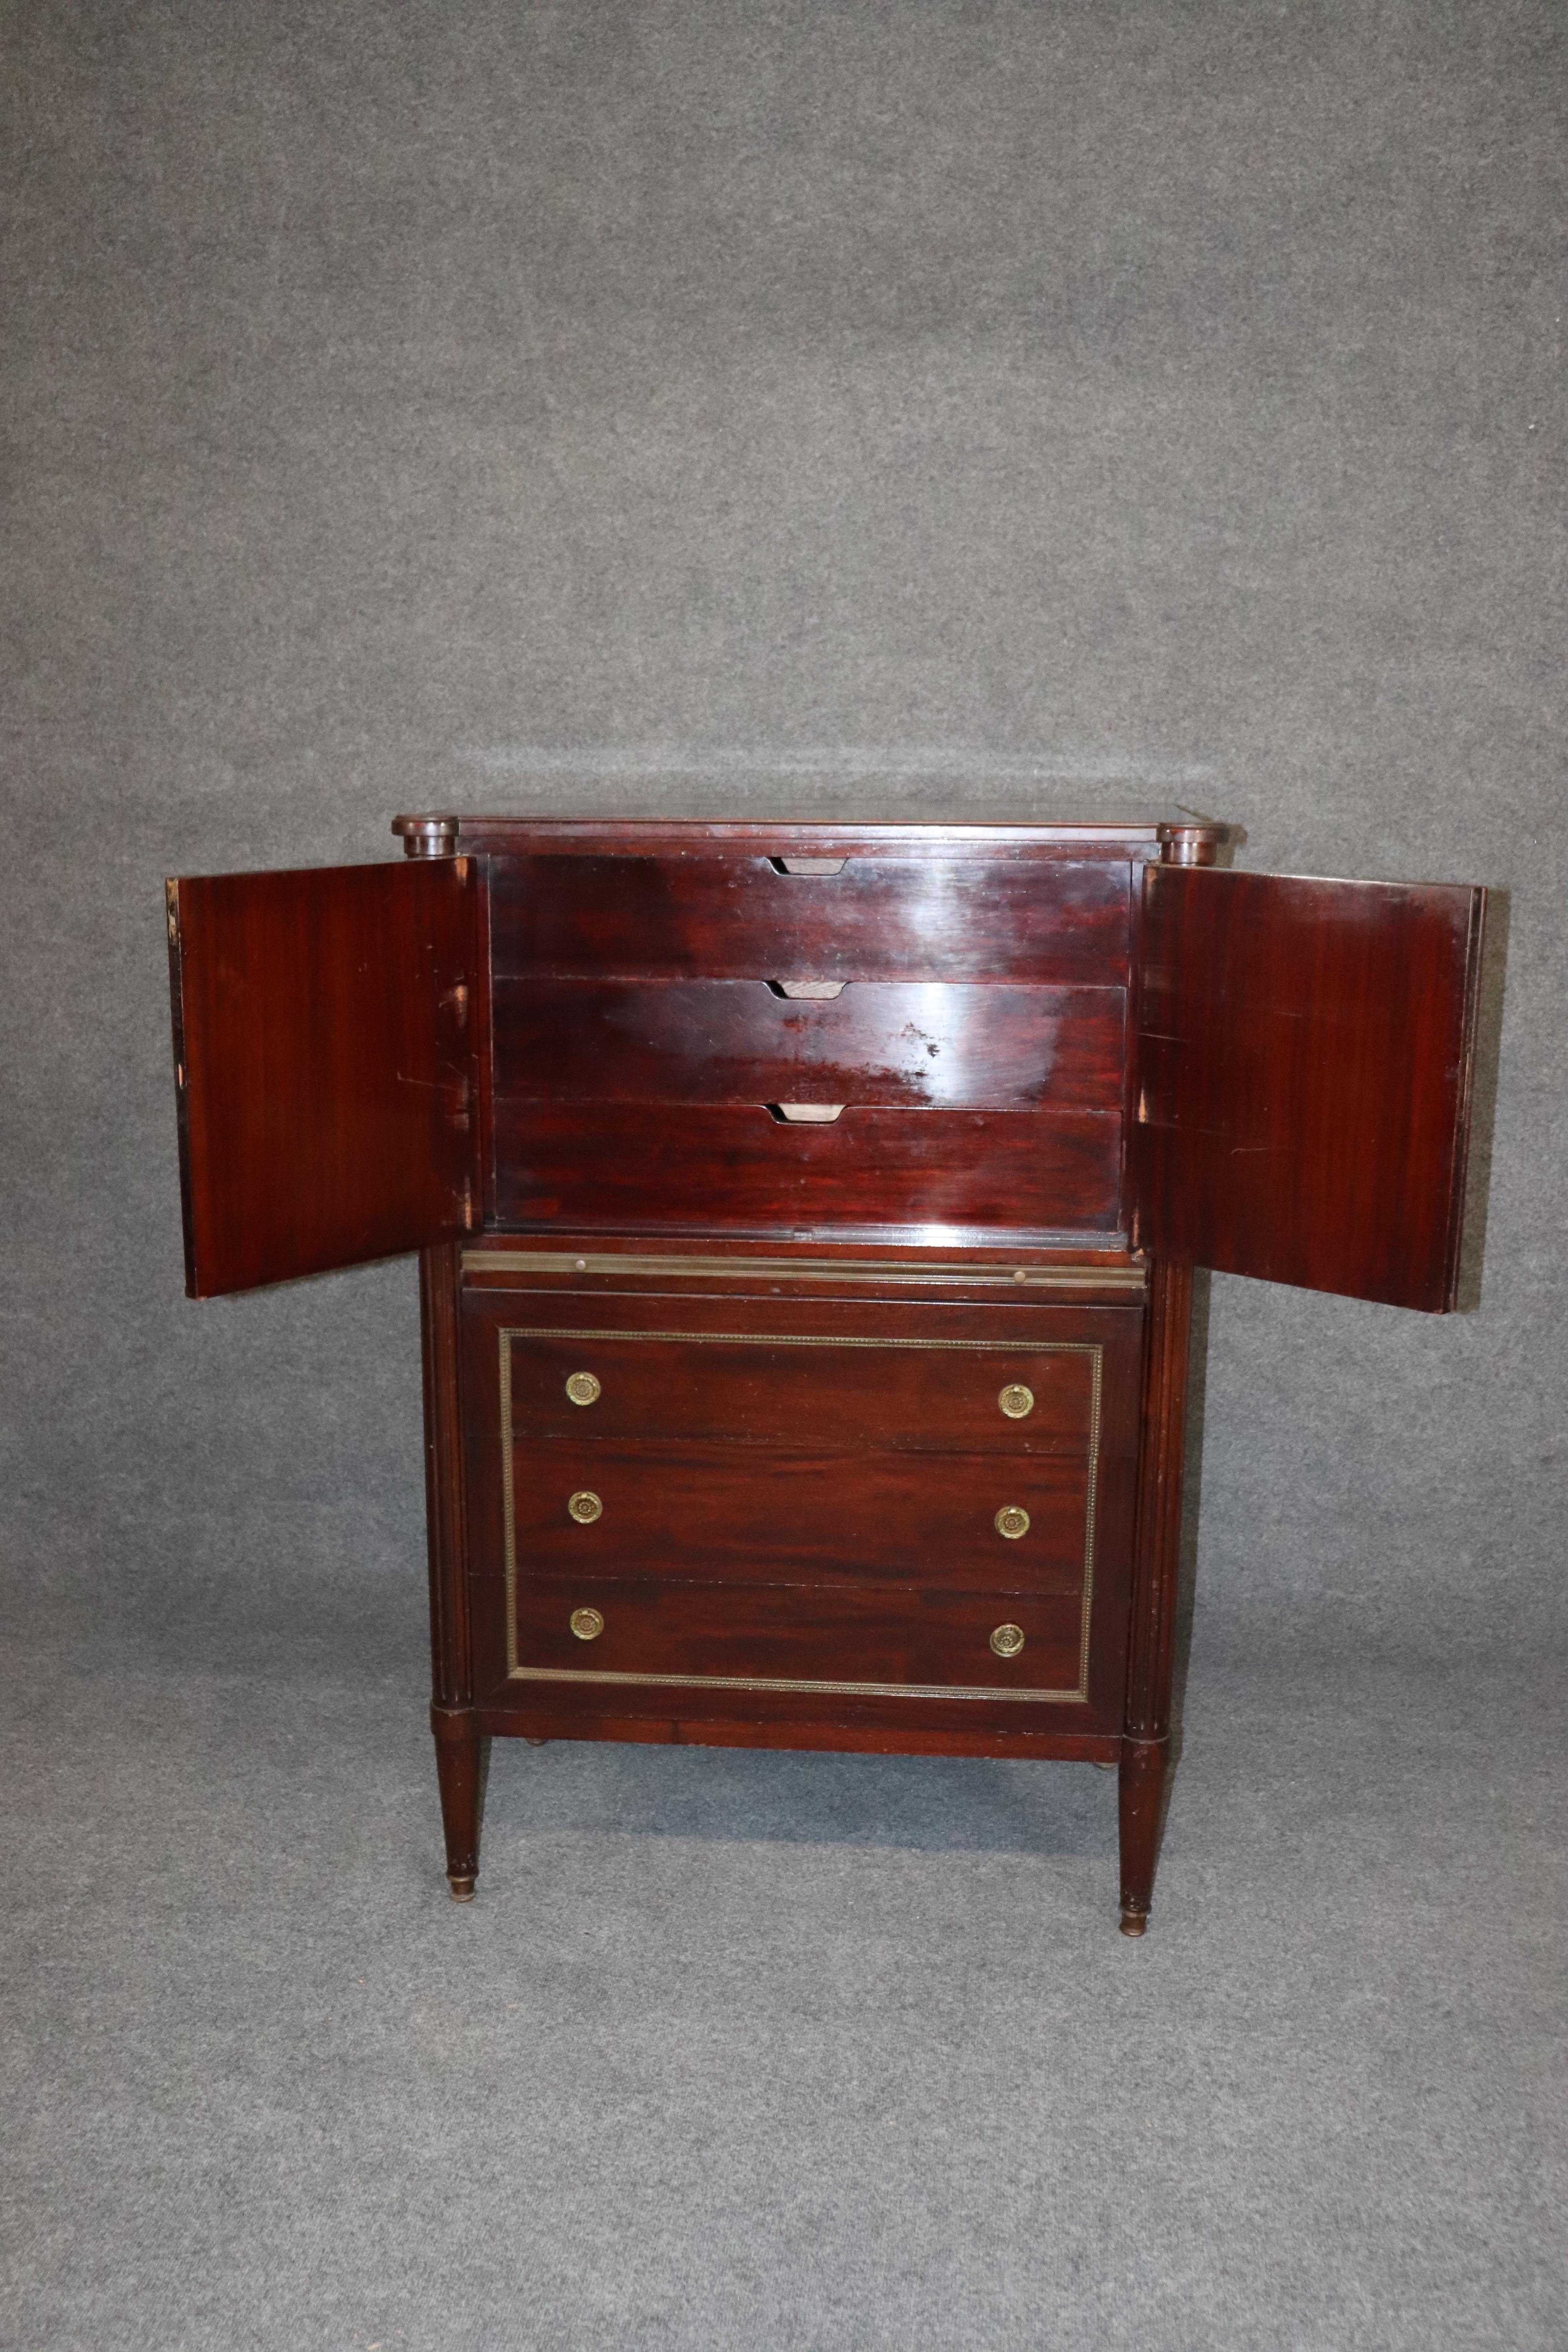 American Solid Mahogany French Directoire Style Fitted Chiffarobe Gentleman's Dresser